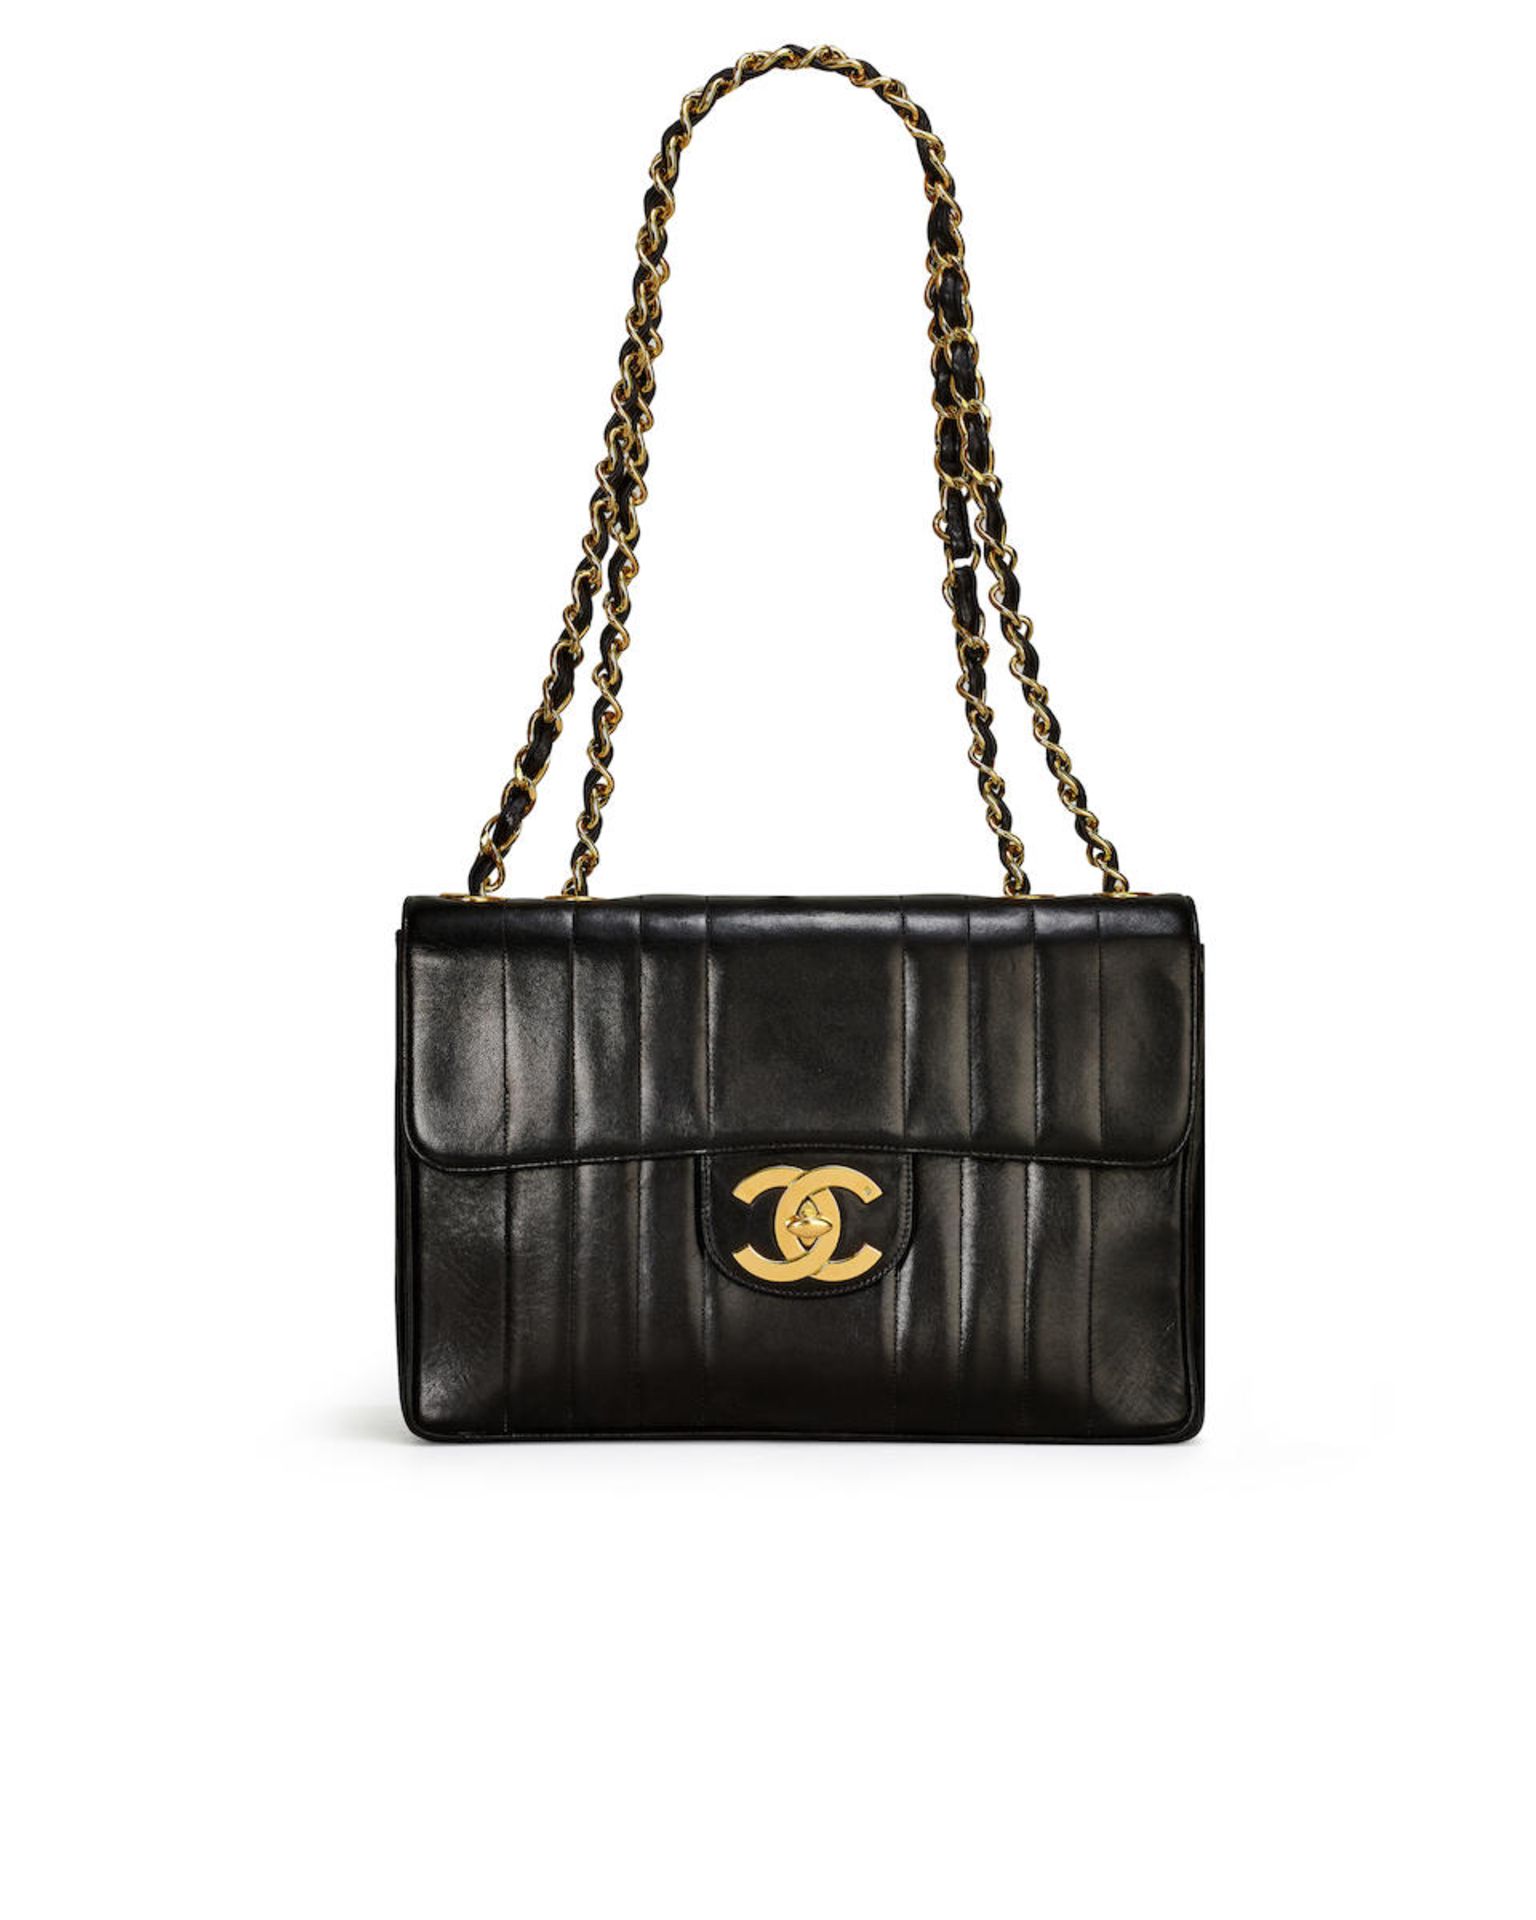 CHANEL: BLACK LAMBSKIN JUMBO VERTICAL STITCH CLASSIC FLAP BAG WITH GOLD TONED HARDWARE (Includes...